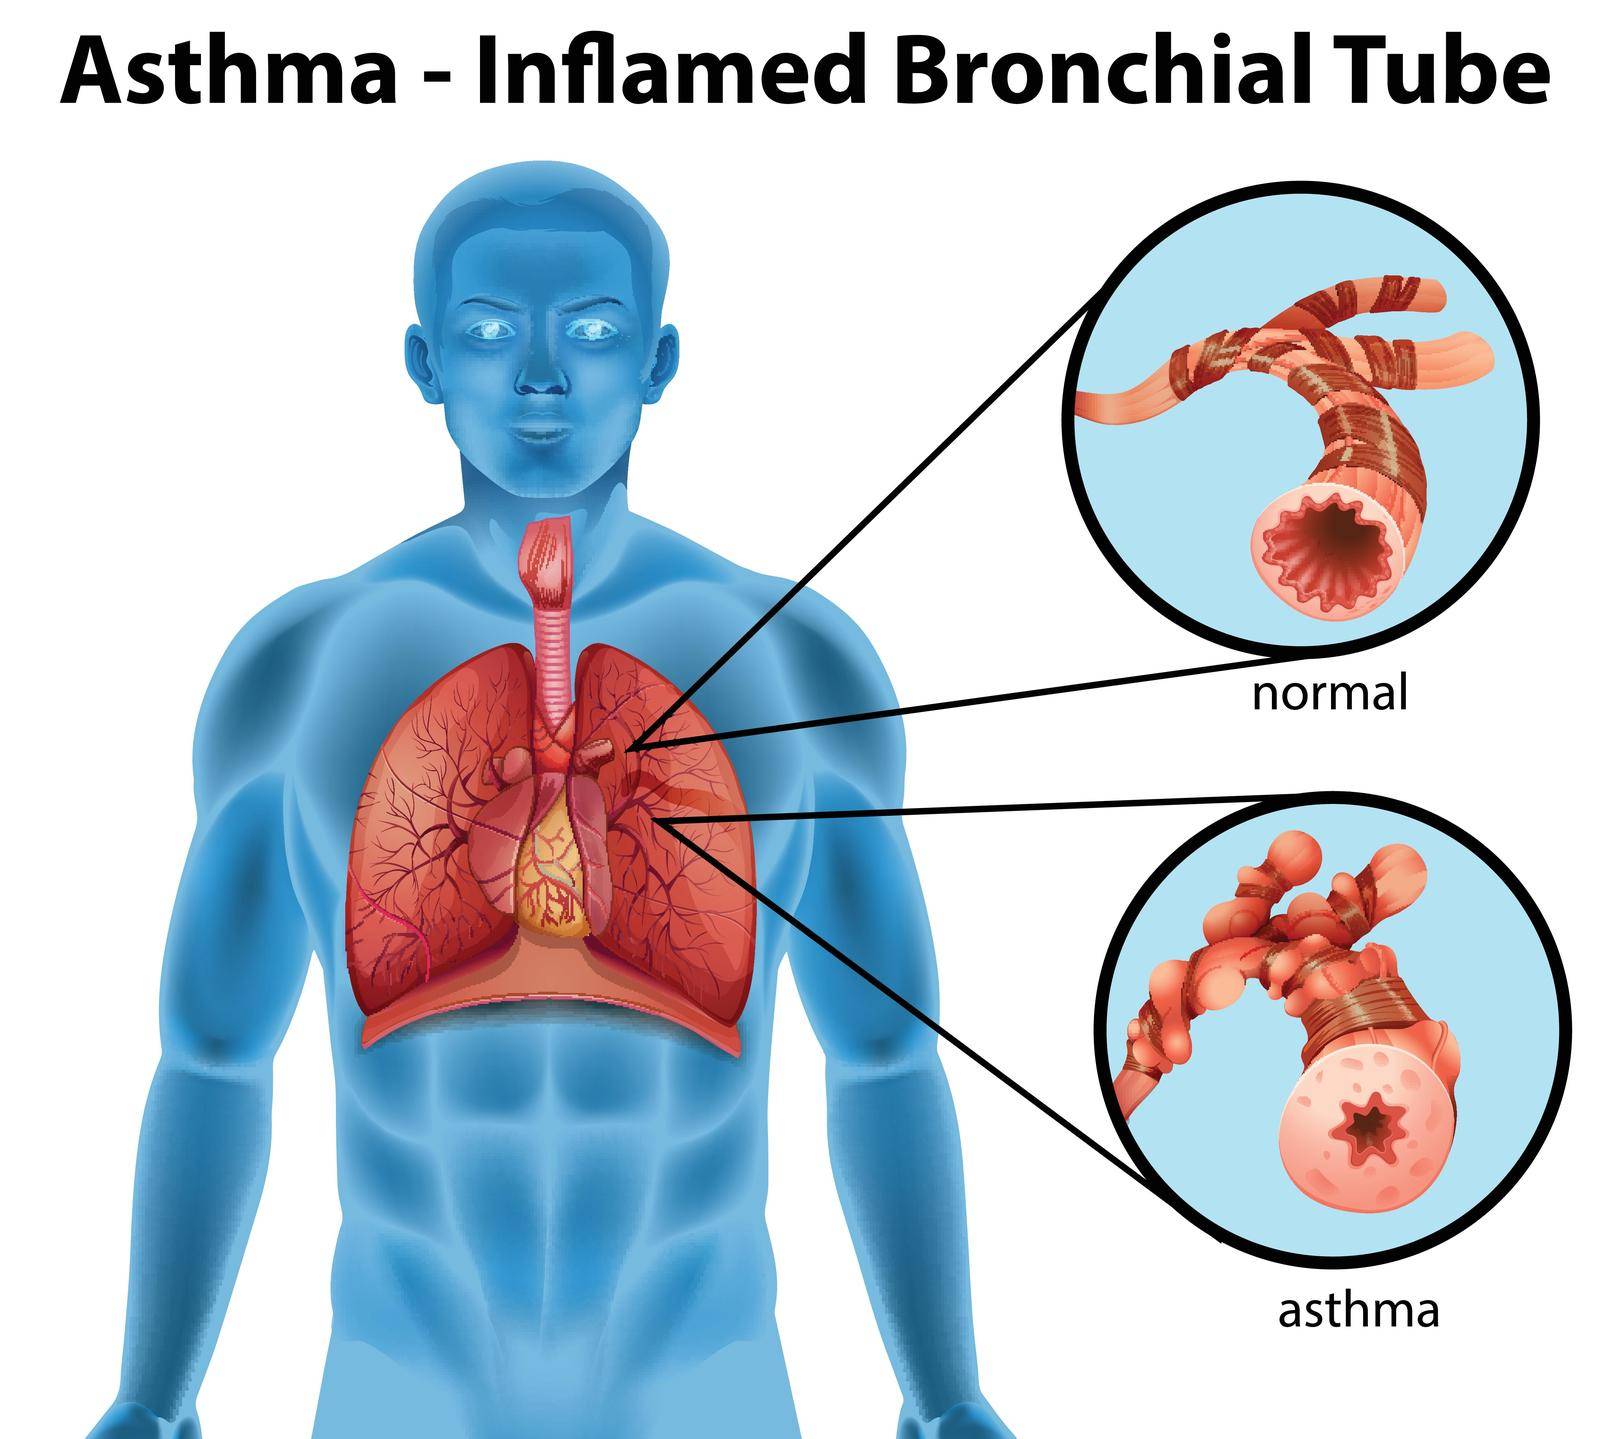 An image showing the asthma-inflamed bronchial tube on a white background